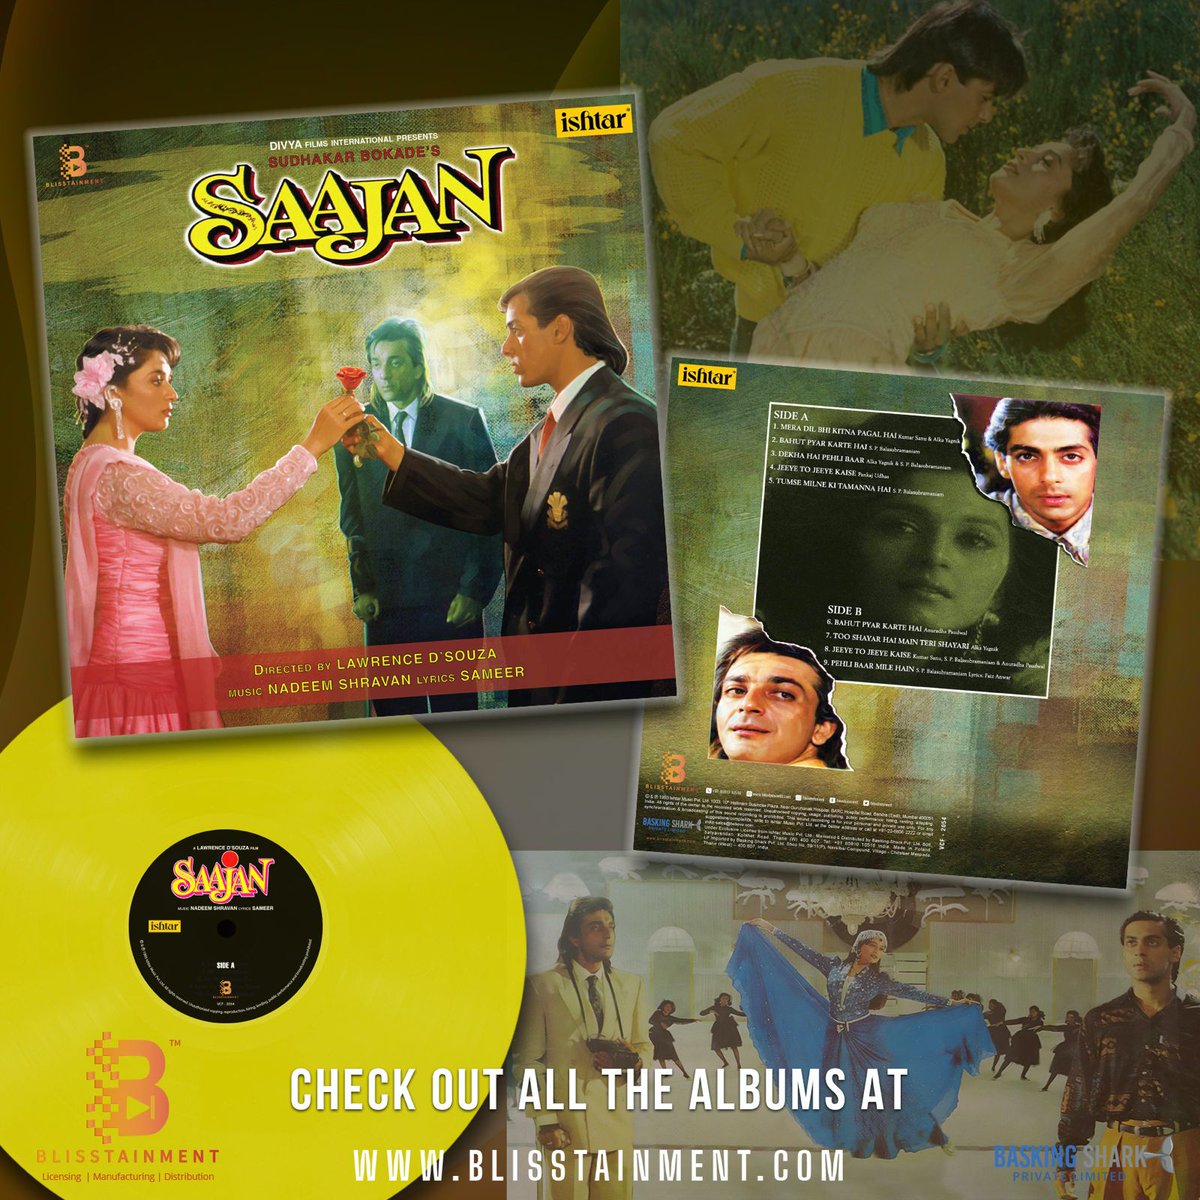 Feel the beautiful music of 'Saajan' on vinyl. Don't miss out!! Link in bio

#vinylcollectors #vinylcollective #vinylcollector #vinylrecords #vinyl